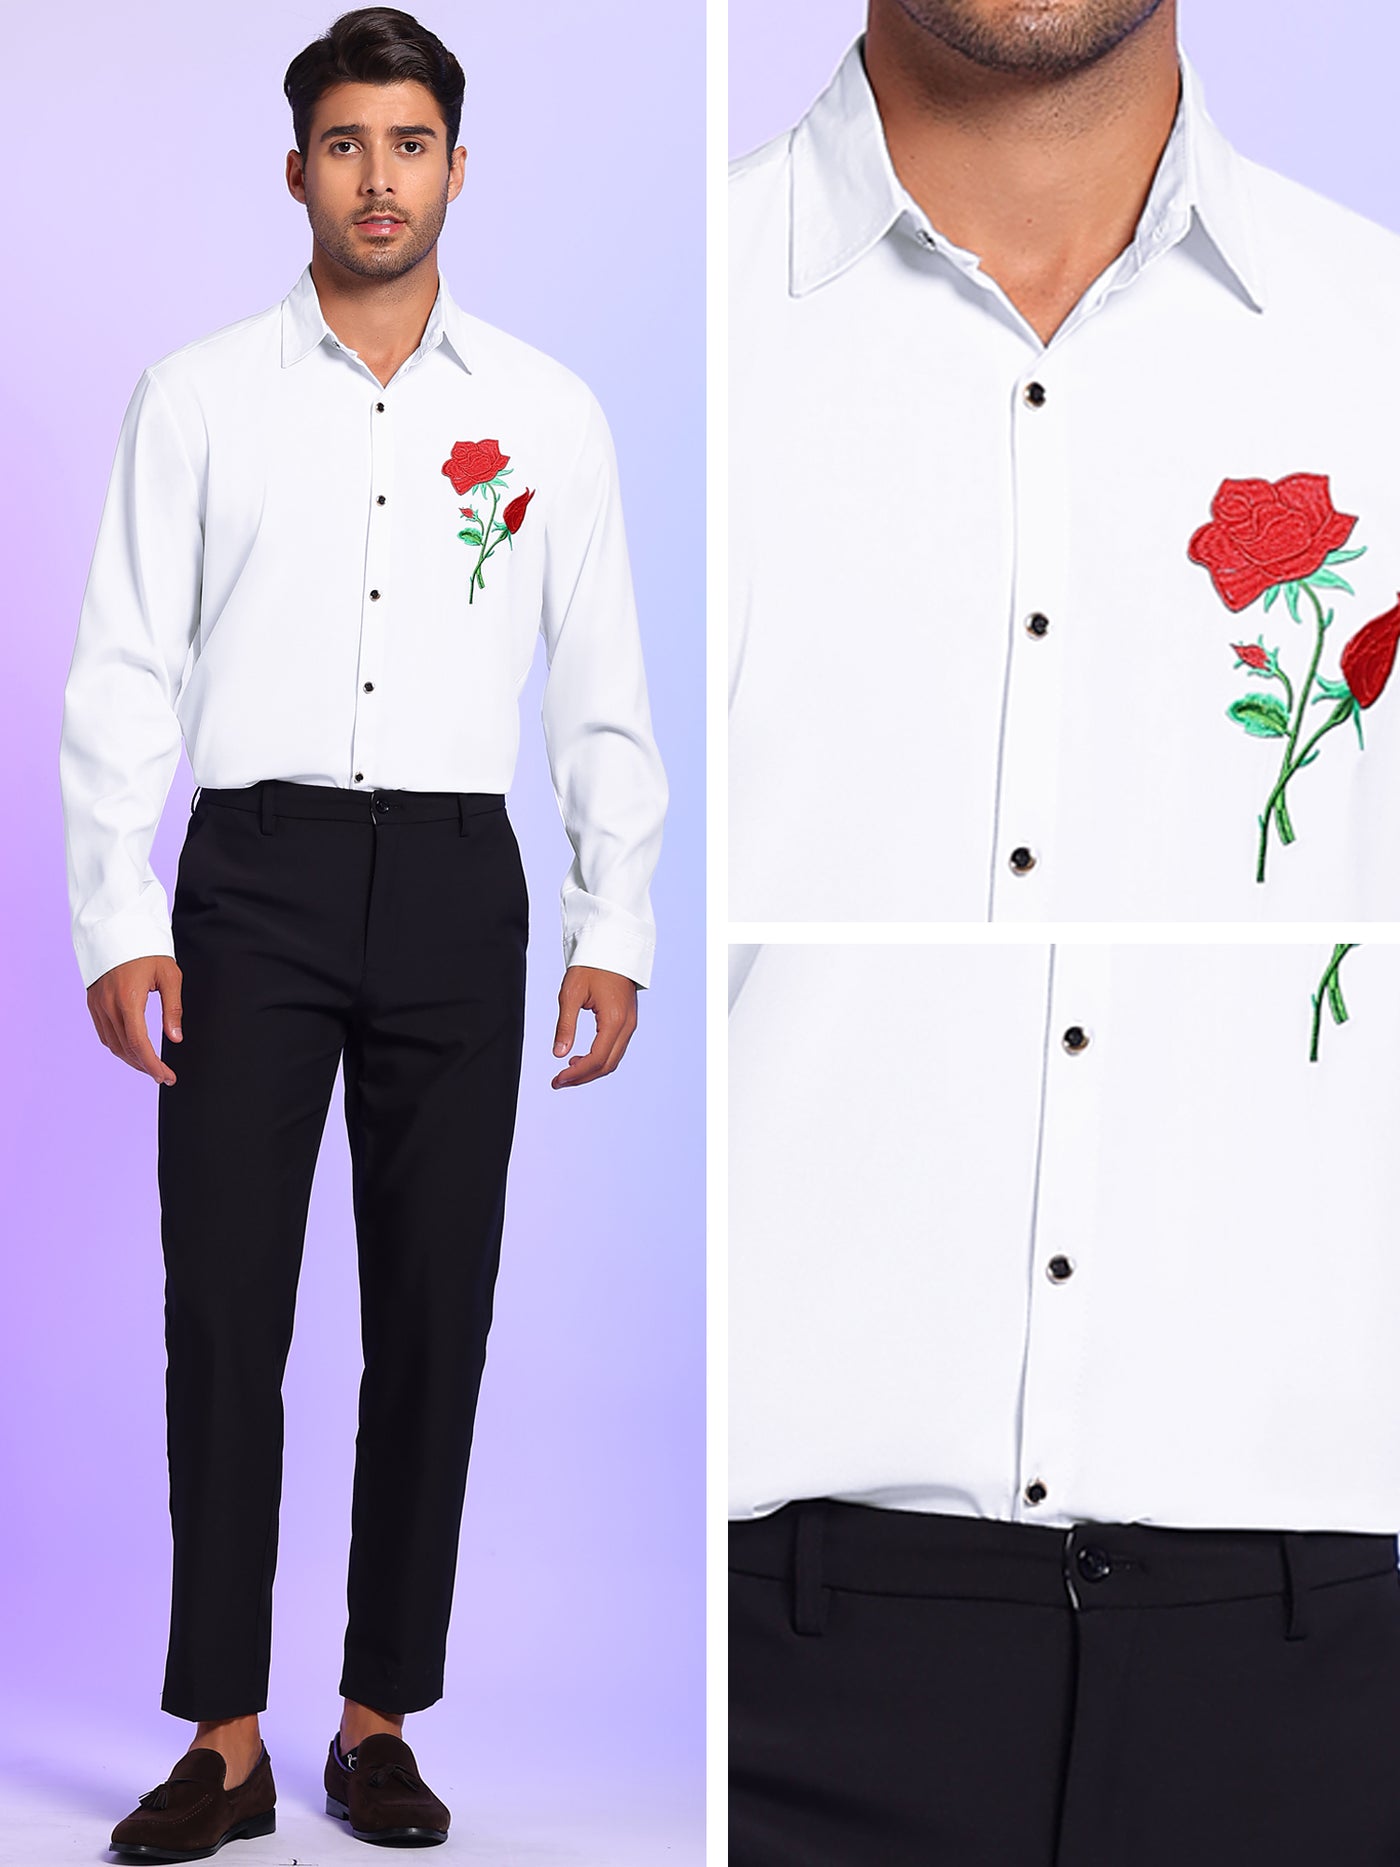 Bublédon Men's Point Collar Long Sleeves Button Floral Embroidery Shirt